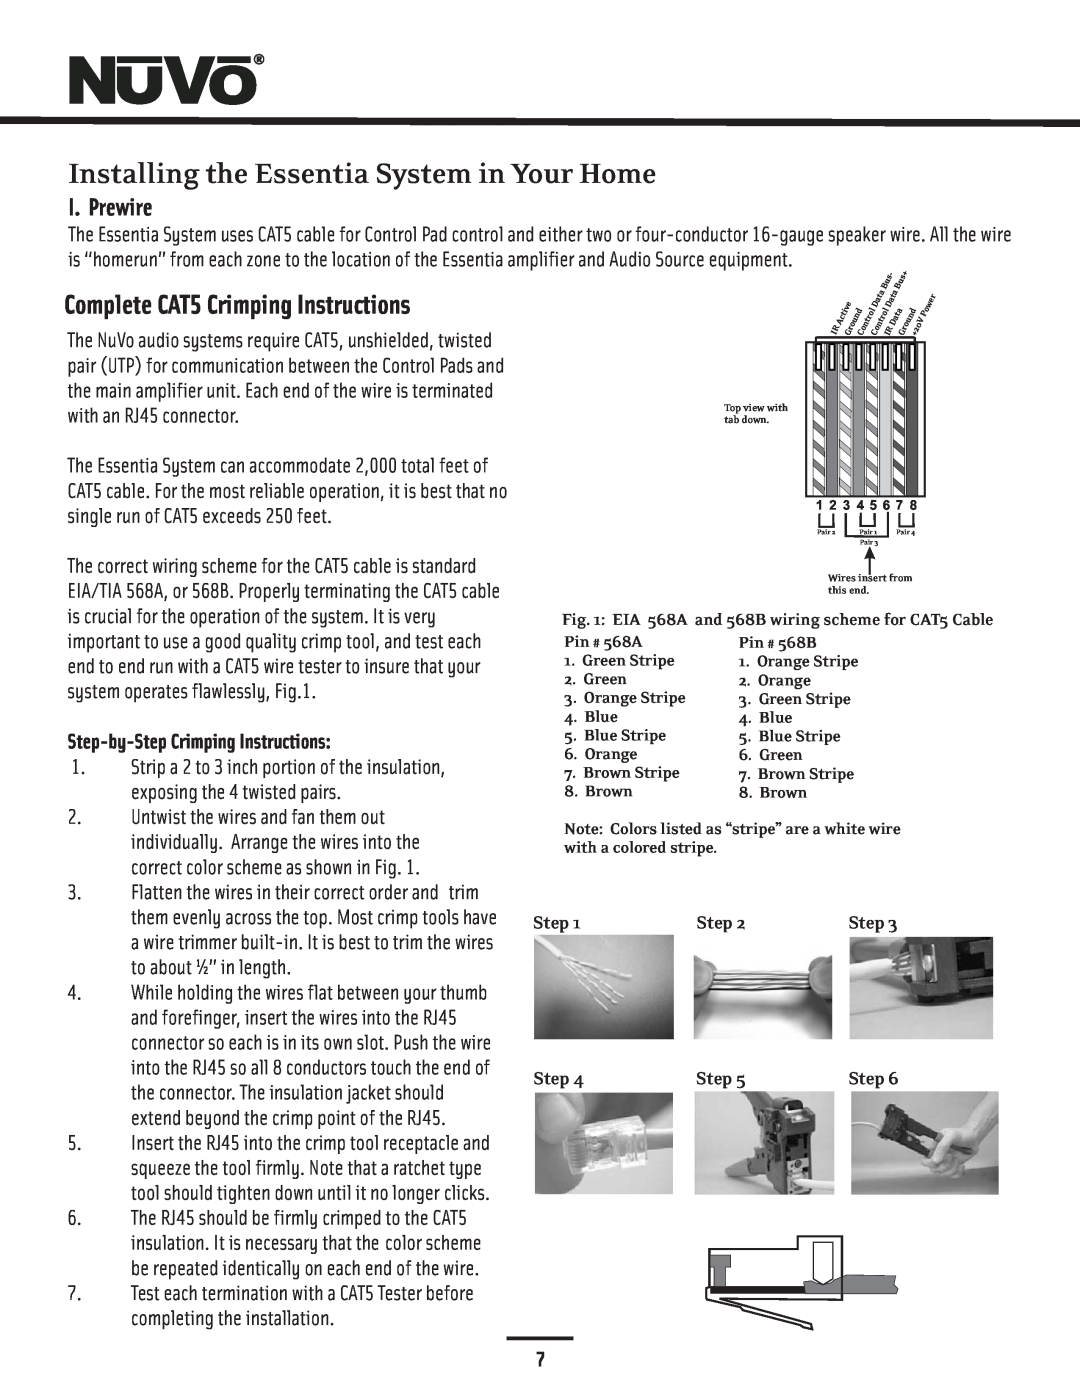 Nuvo NV-E6GMS, NV-E6GXS manual Installing the Essentia System in Your Home, Complete CAT5 Crimping Instructions, I. Prewire 